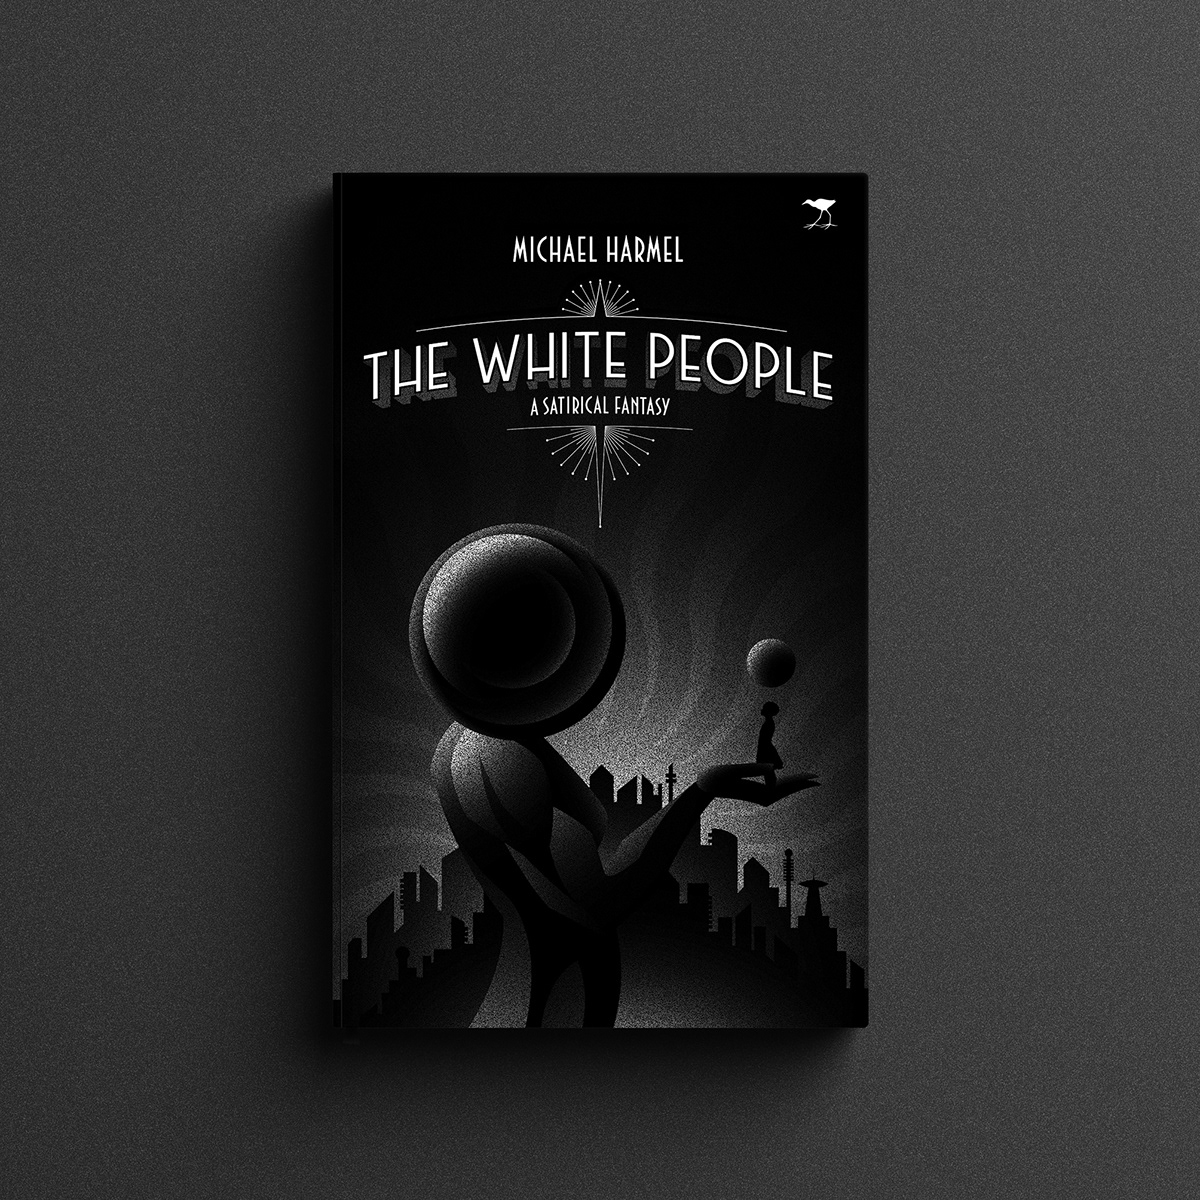 book cover book sleeve concept graphic design  ILLUSTRATION 